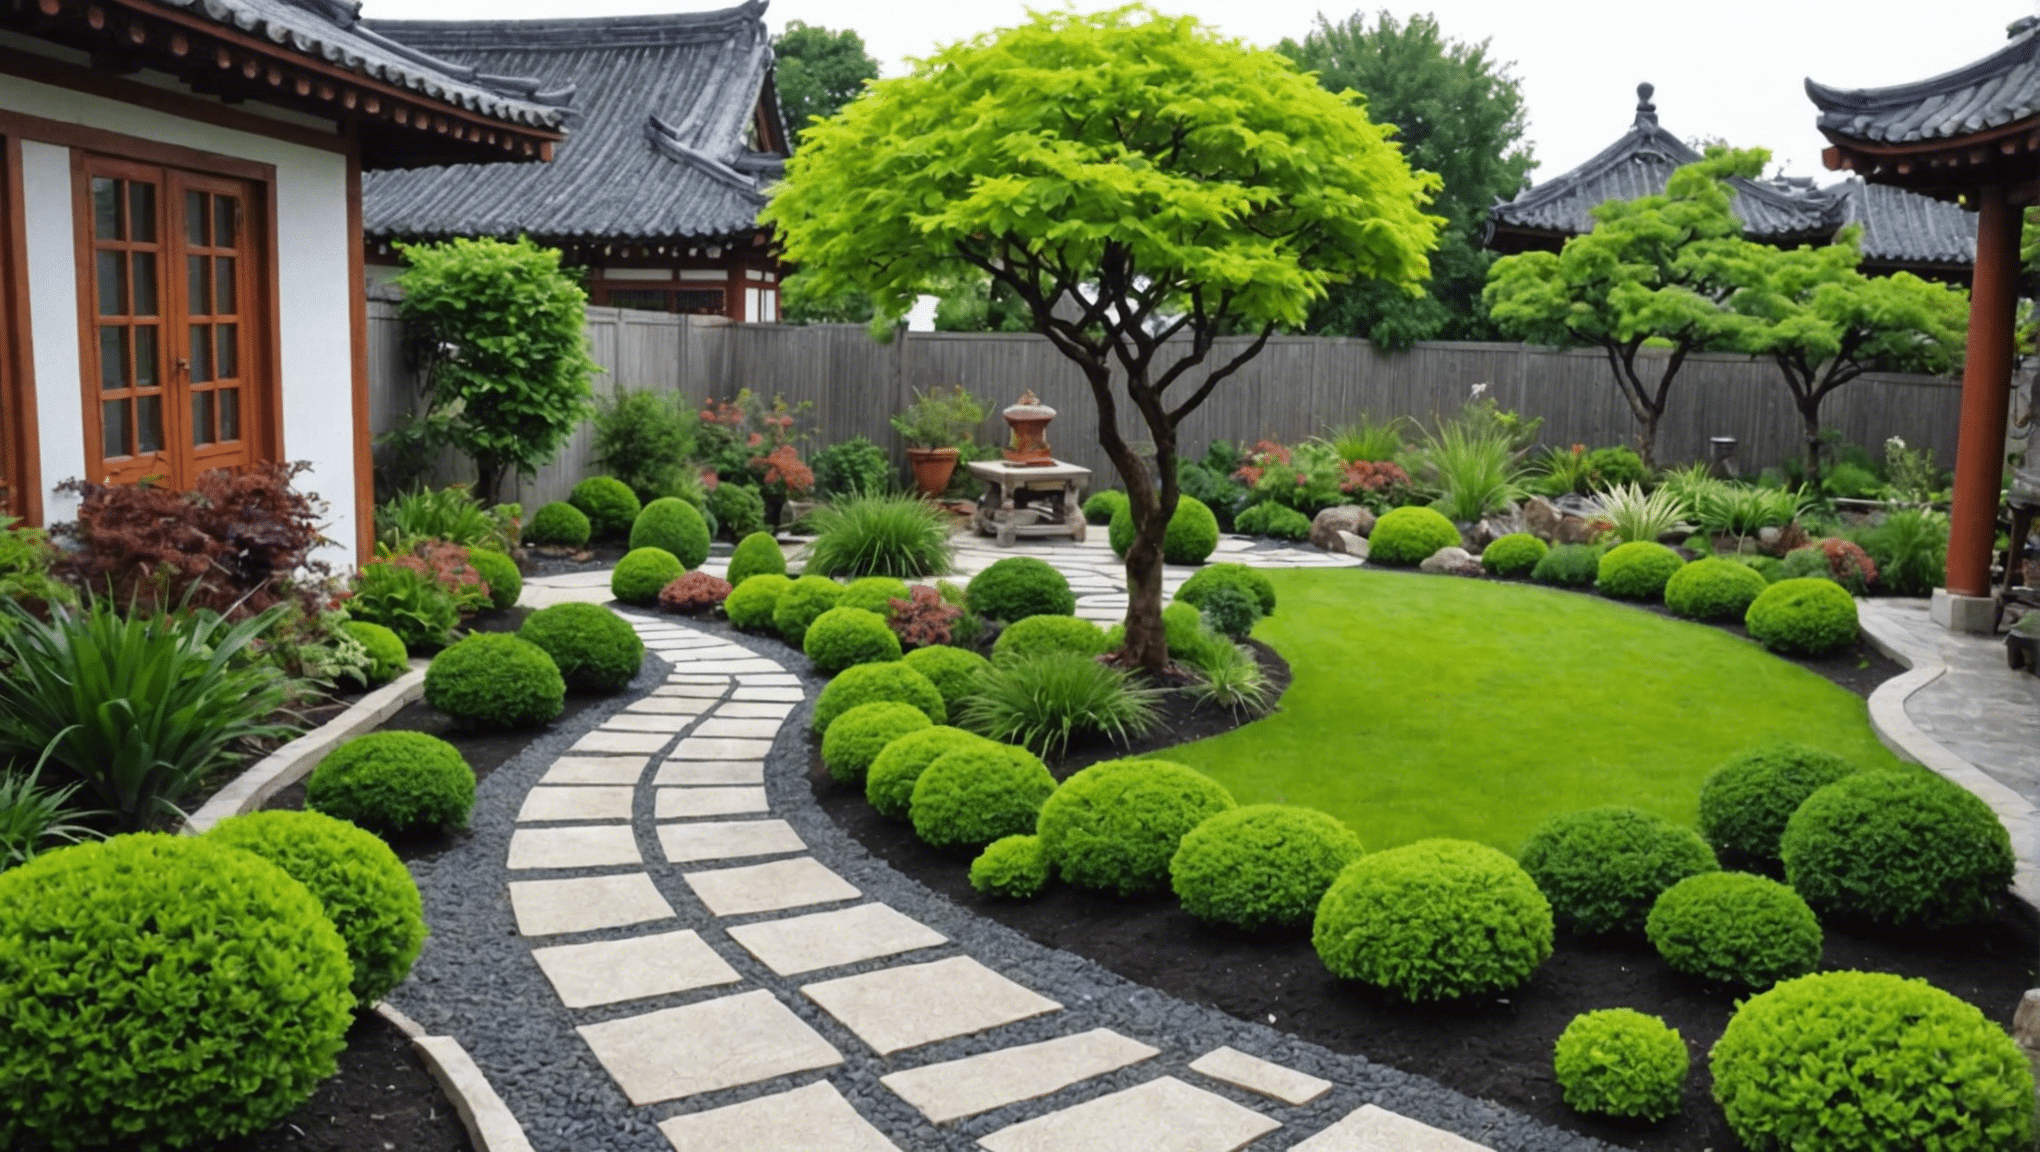 discover creative and inspiring asian gardening ideas for your outdoor space with our expert tips and inspiration. from traditional japanese gardens to modern zen designs, find the perfect inspiration for your outdoor oasis.